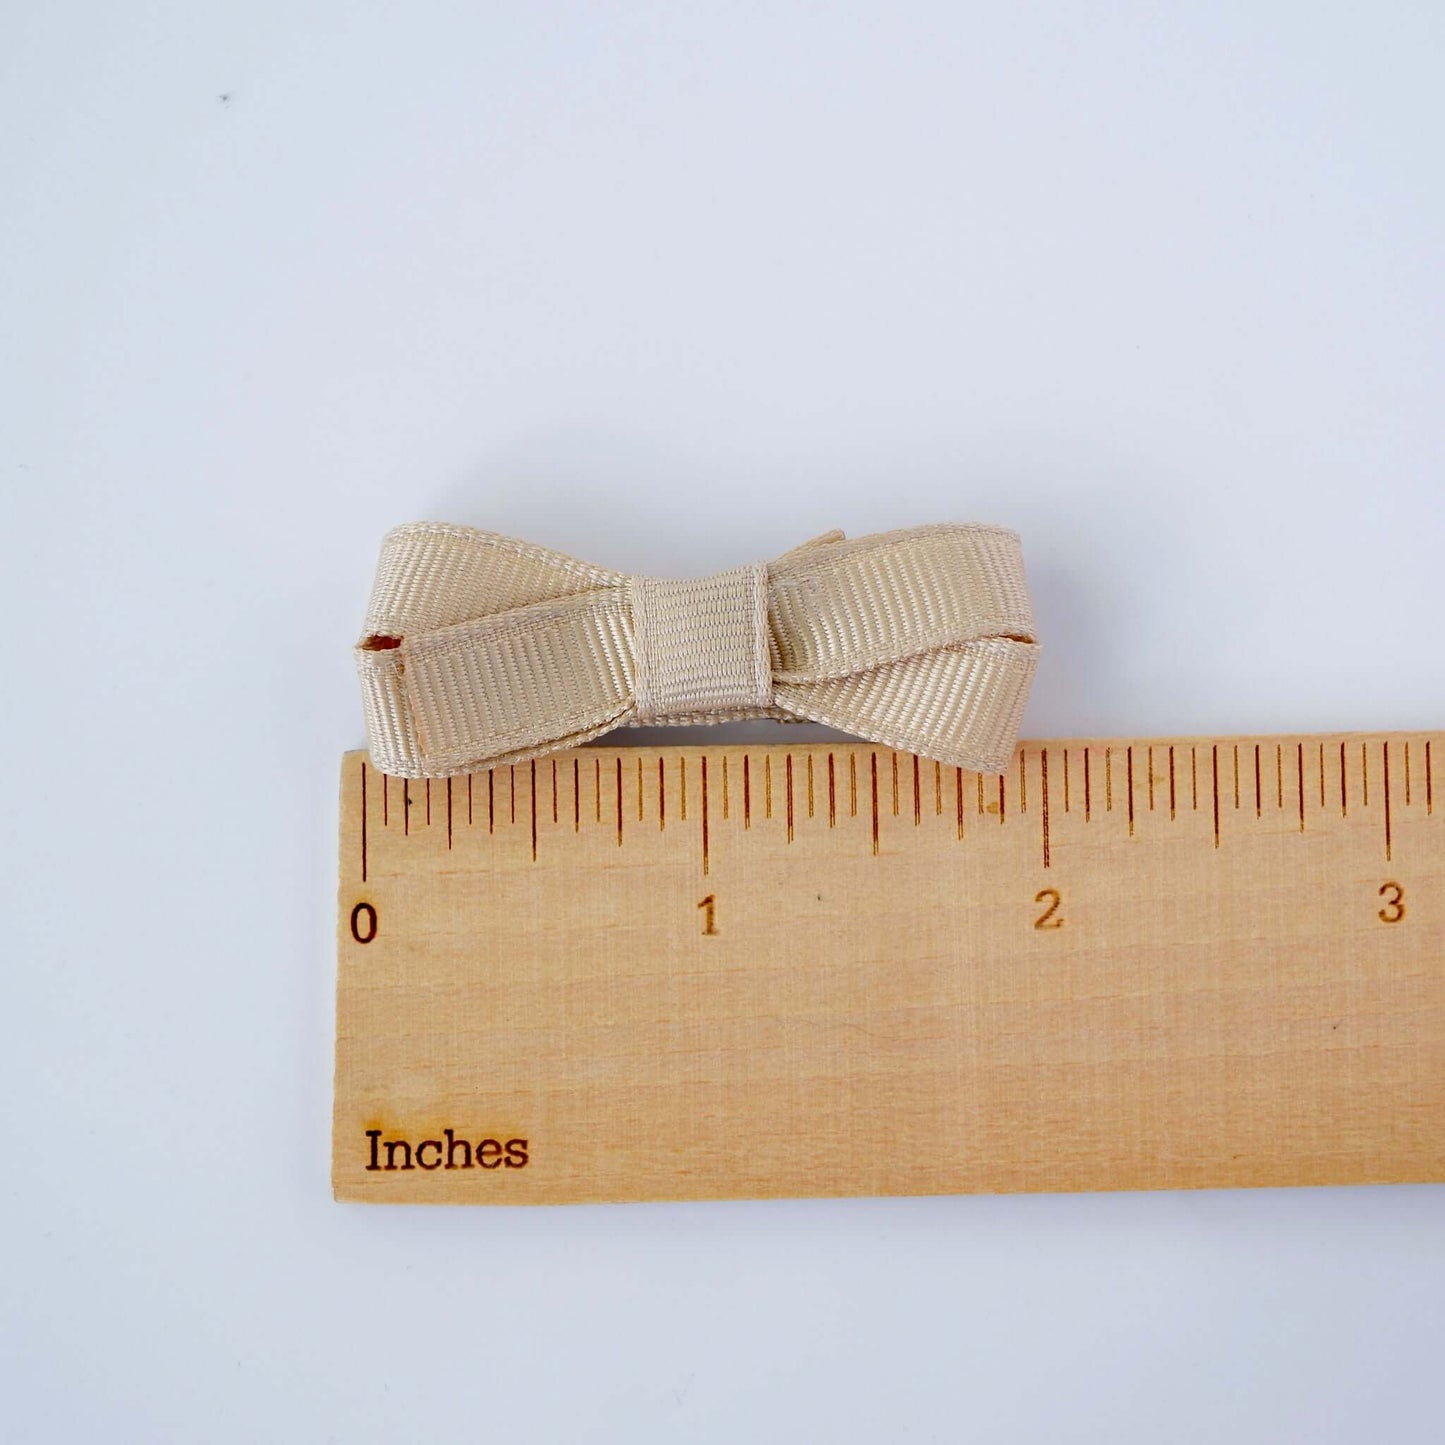 Mini grosgrain hair bow for babies and toddlers next to a ruler showing 2-inch width